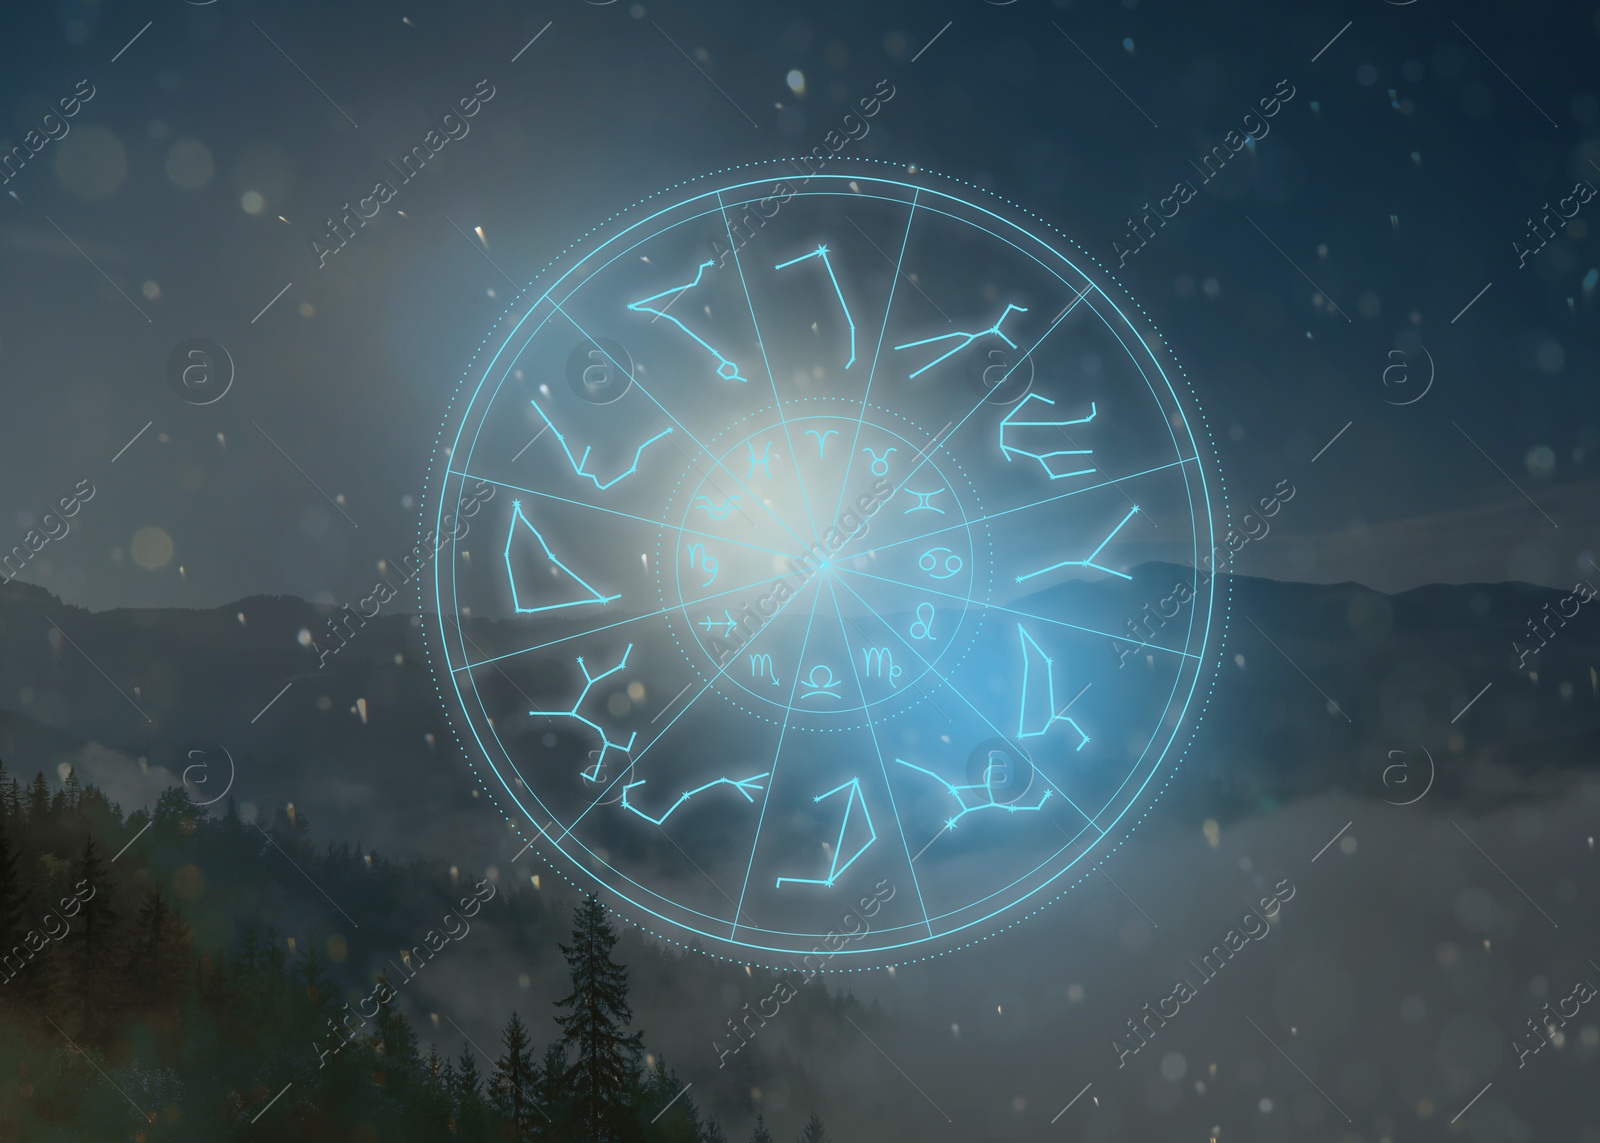 Image of Zodiac wheel with 12 astrological signs and star constellations and mountain landscape on background